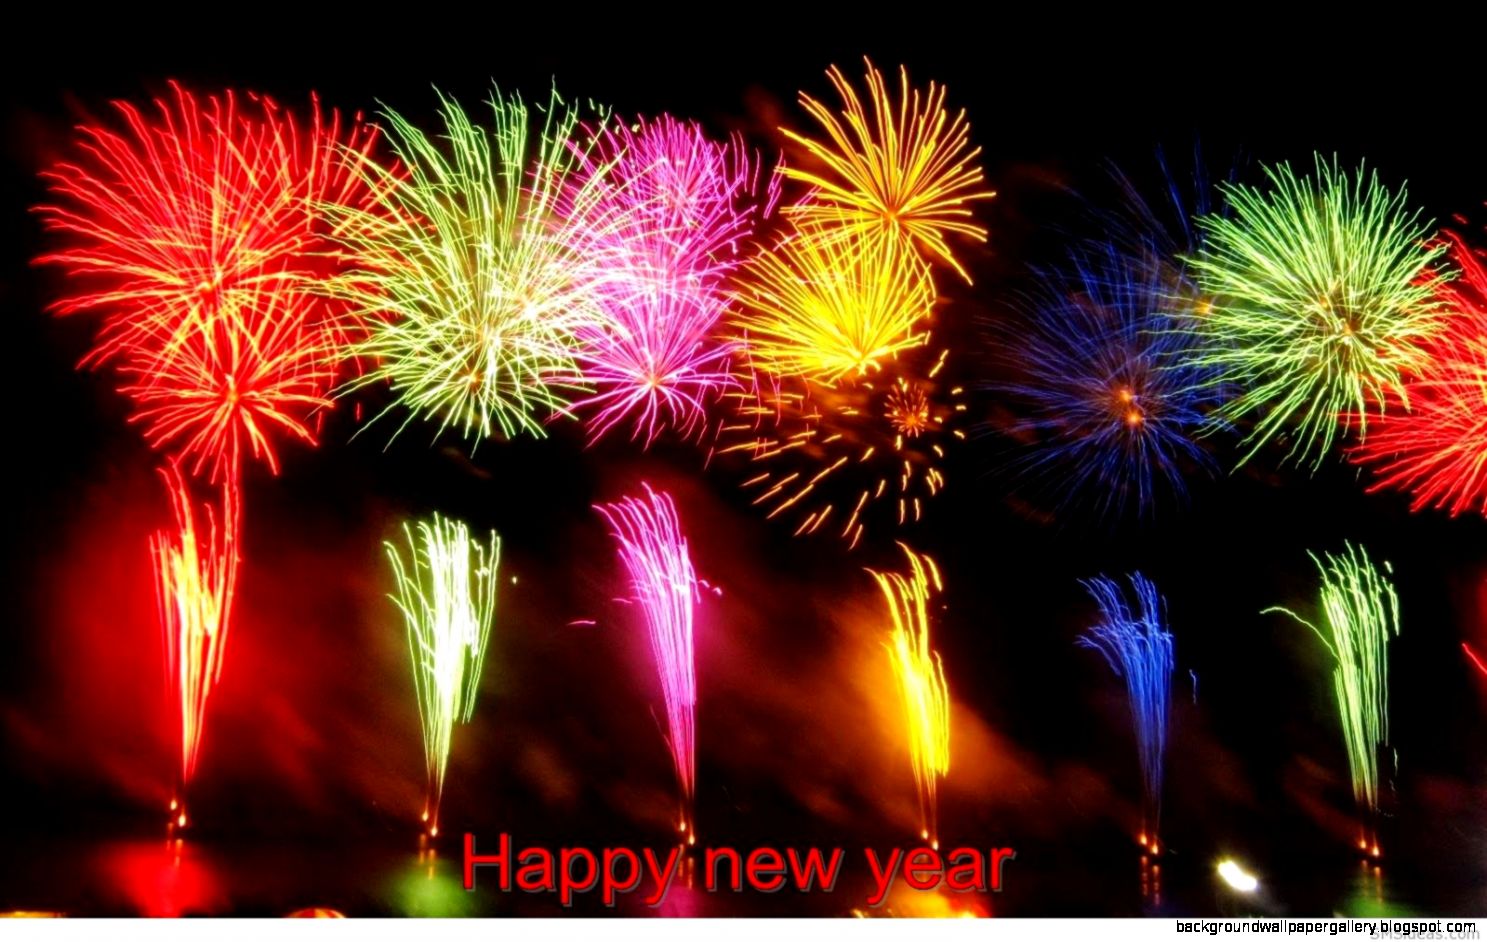 Happy New Year 2015 Firework Celebration Wallpapers - Safety Around Fireworks - HD Wallpaper 